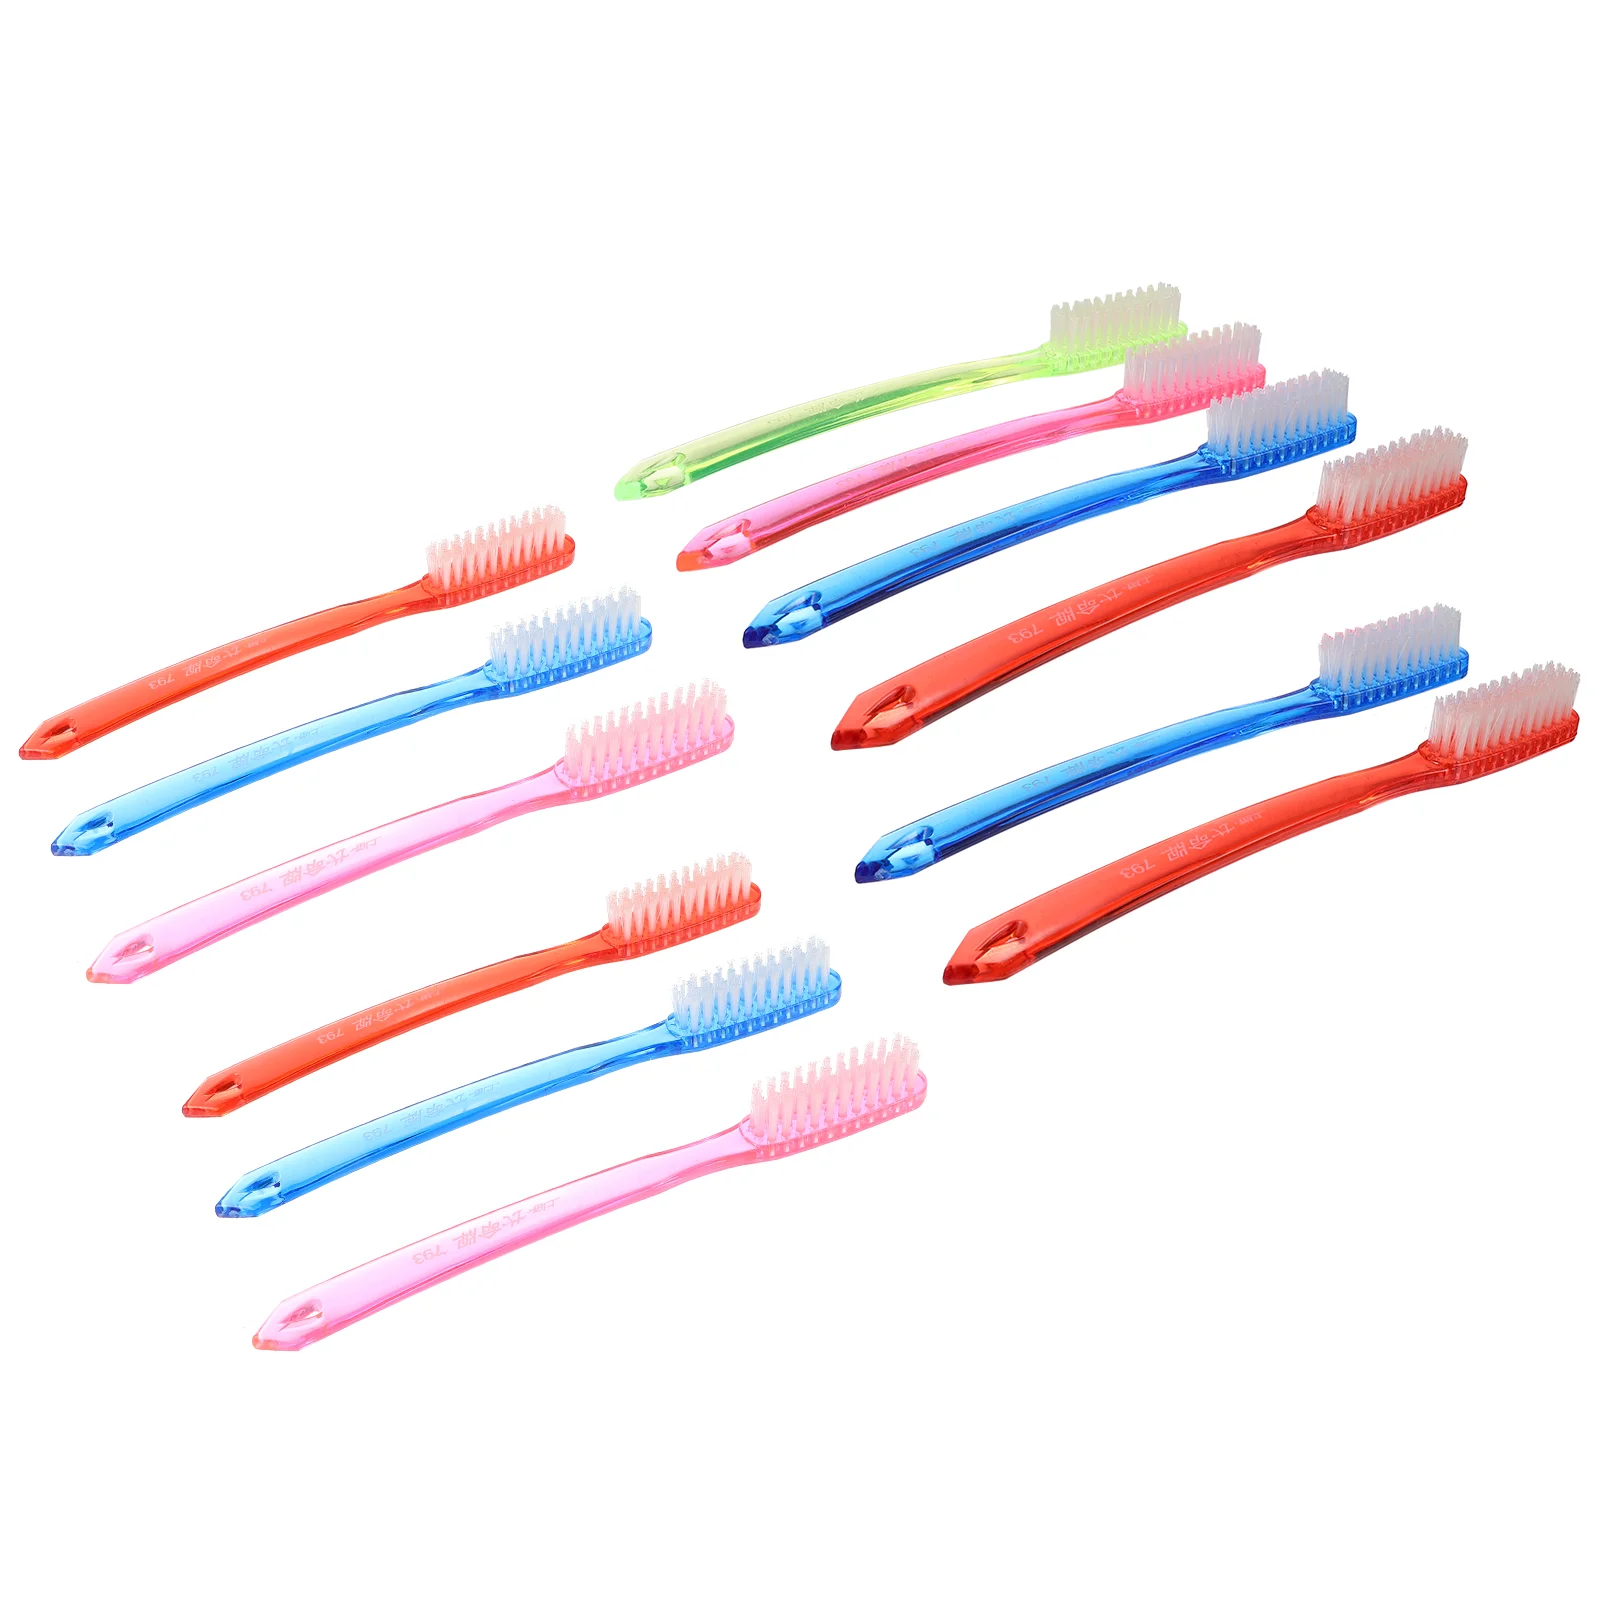 

Bulk Practical Manual Disposable For Adult Teeth Stain Portable Oral Hygiene Care (Random Color) Travel Toothbrush